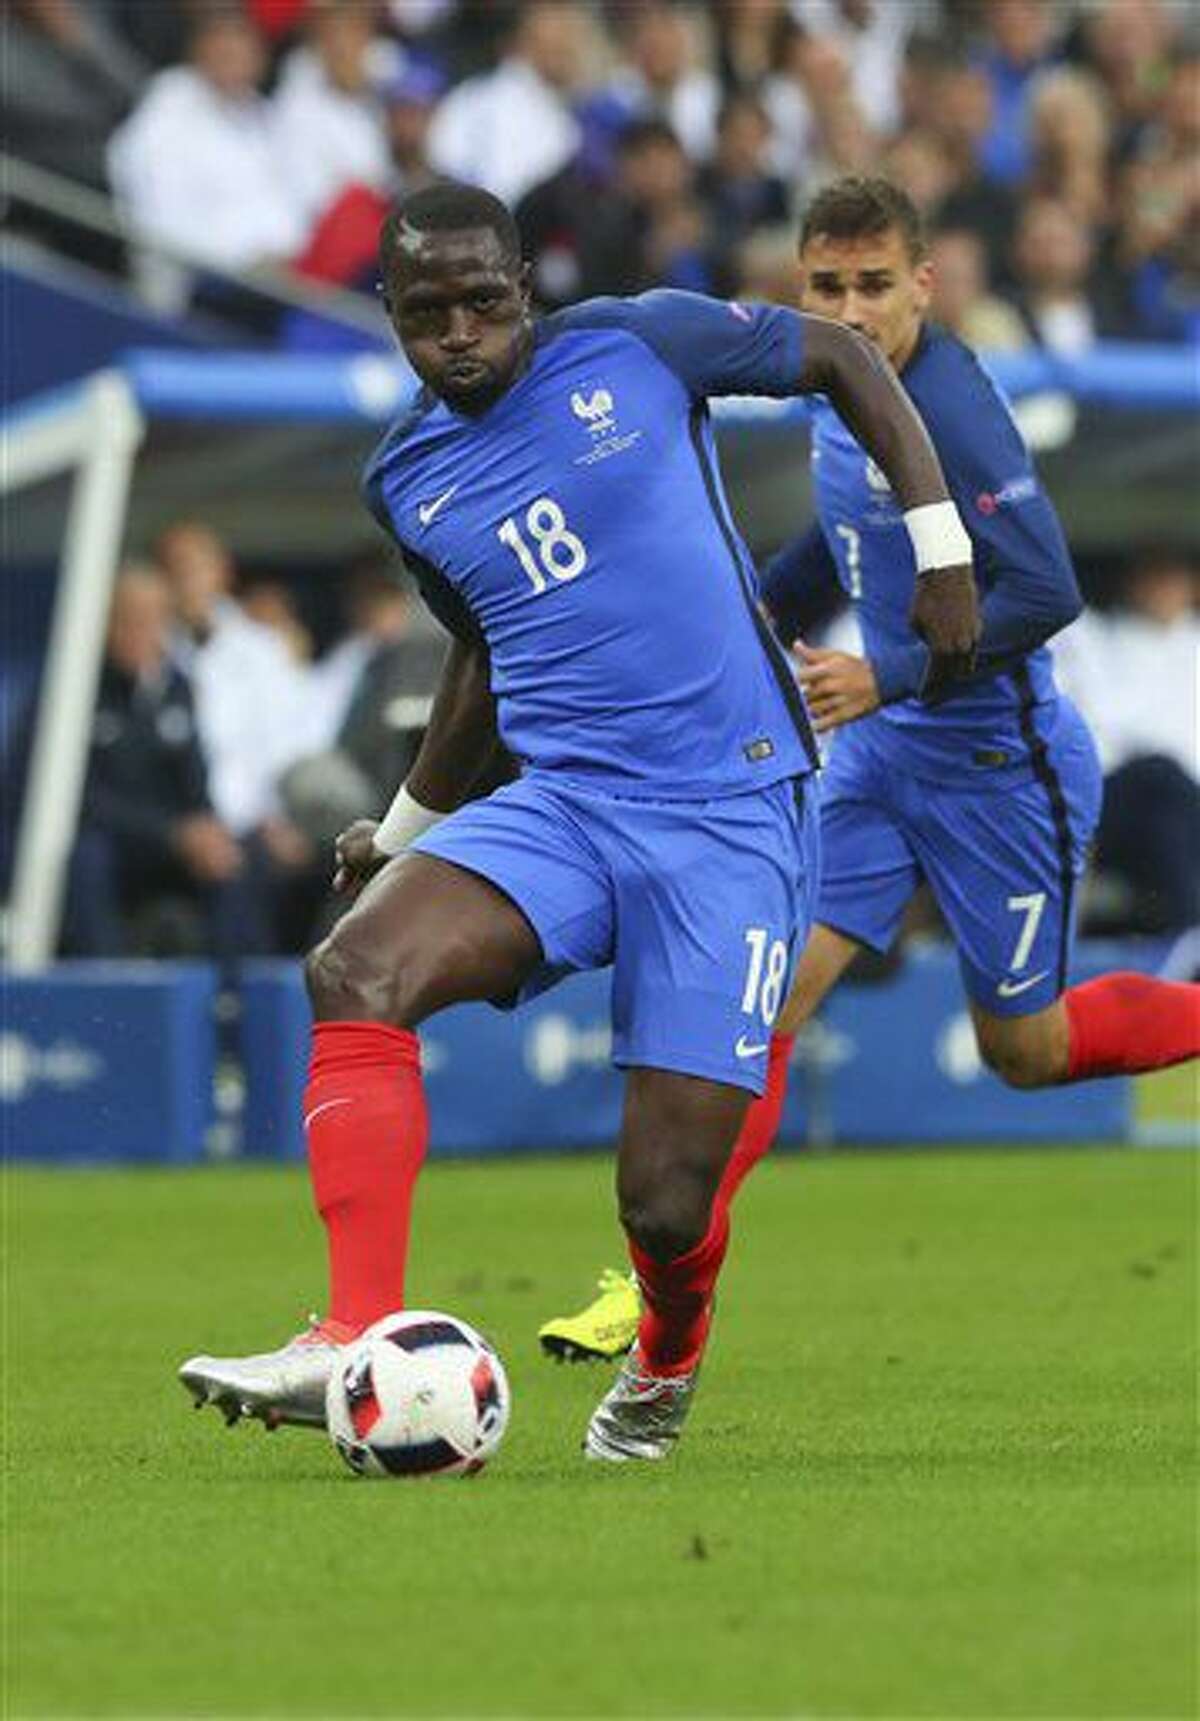 France's Moussa Sissoko passes the ball during the Euro 2016 quarterfinal soccer match between France and Iceland, at the Stade de France in Saint-Denis, north of Paris, France, Sunday, July 3, 2016. (AP Photo/Thibault Camus)